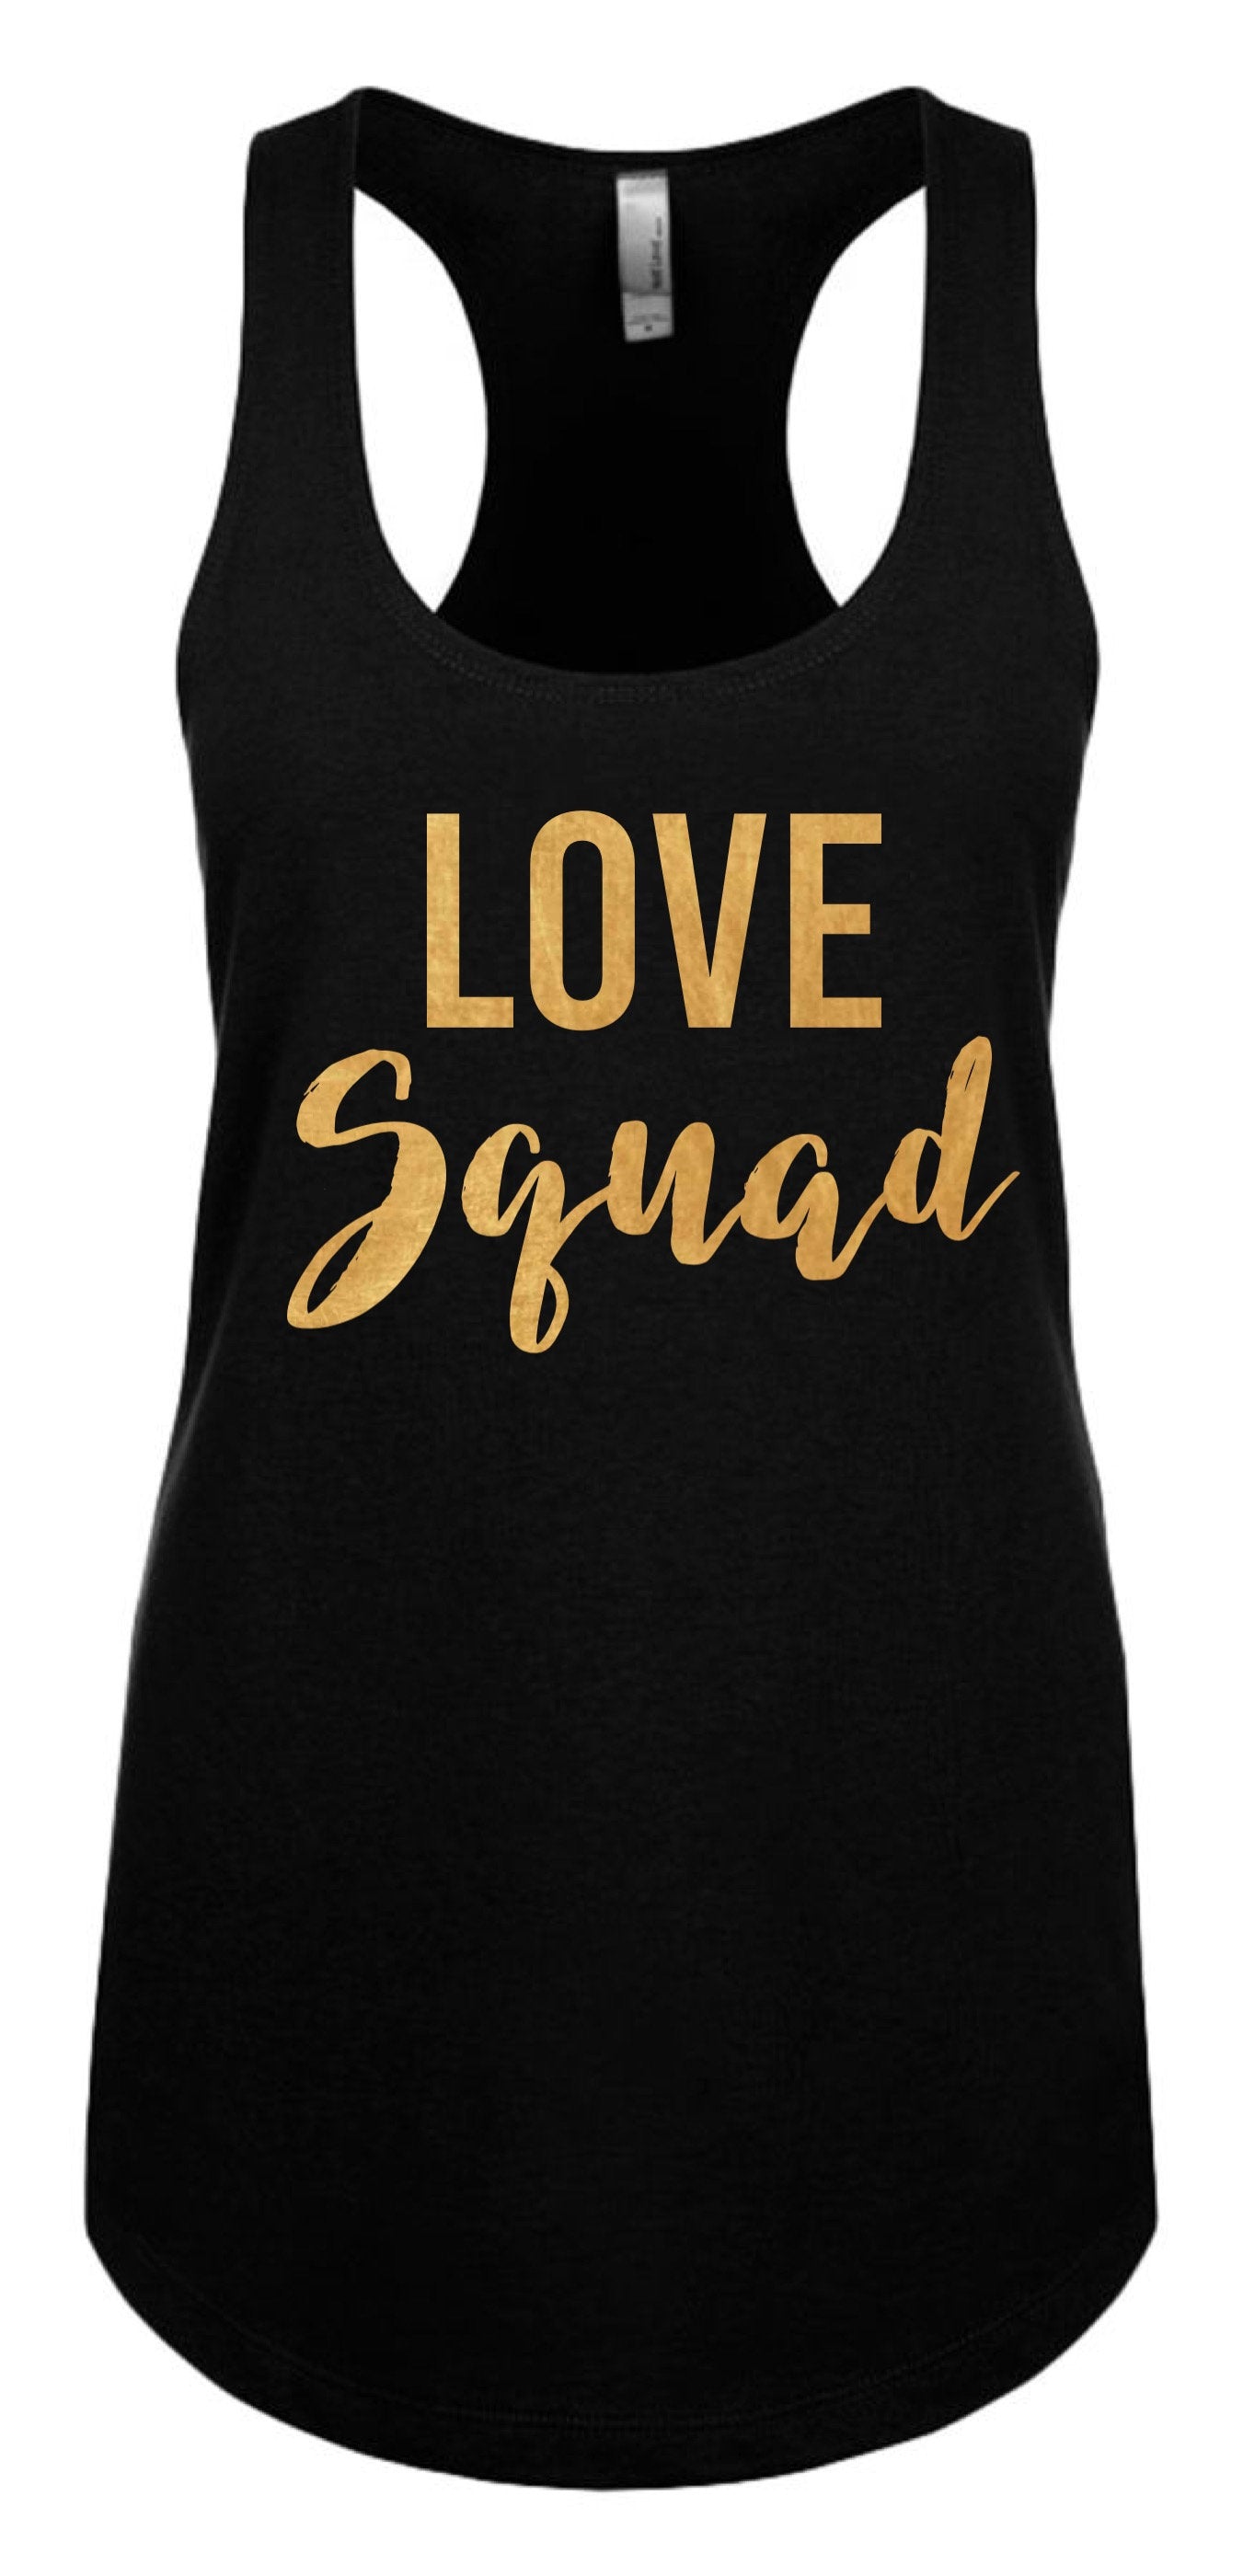 Wife of the party shirt, Bride and Bridesmaid shirts| Bachelorette tanks| girls trip shirts| bachelorette shirts| Love Squad | bridesmaid shirt